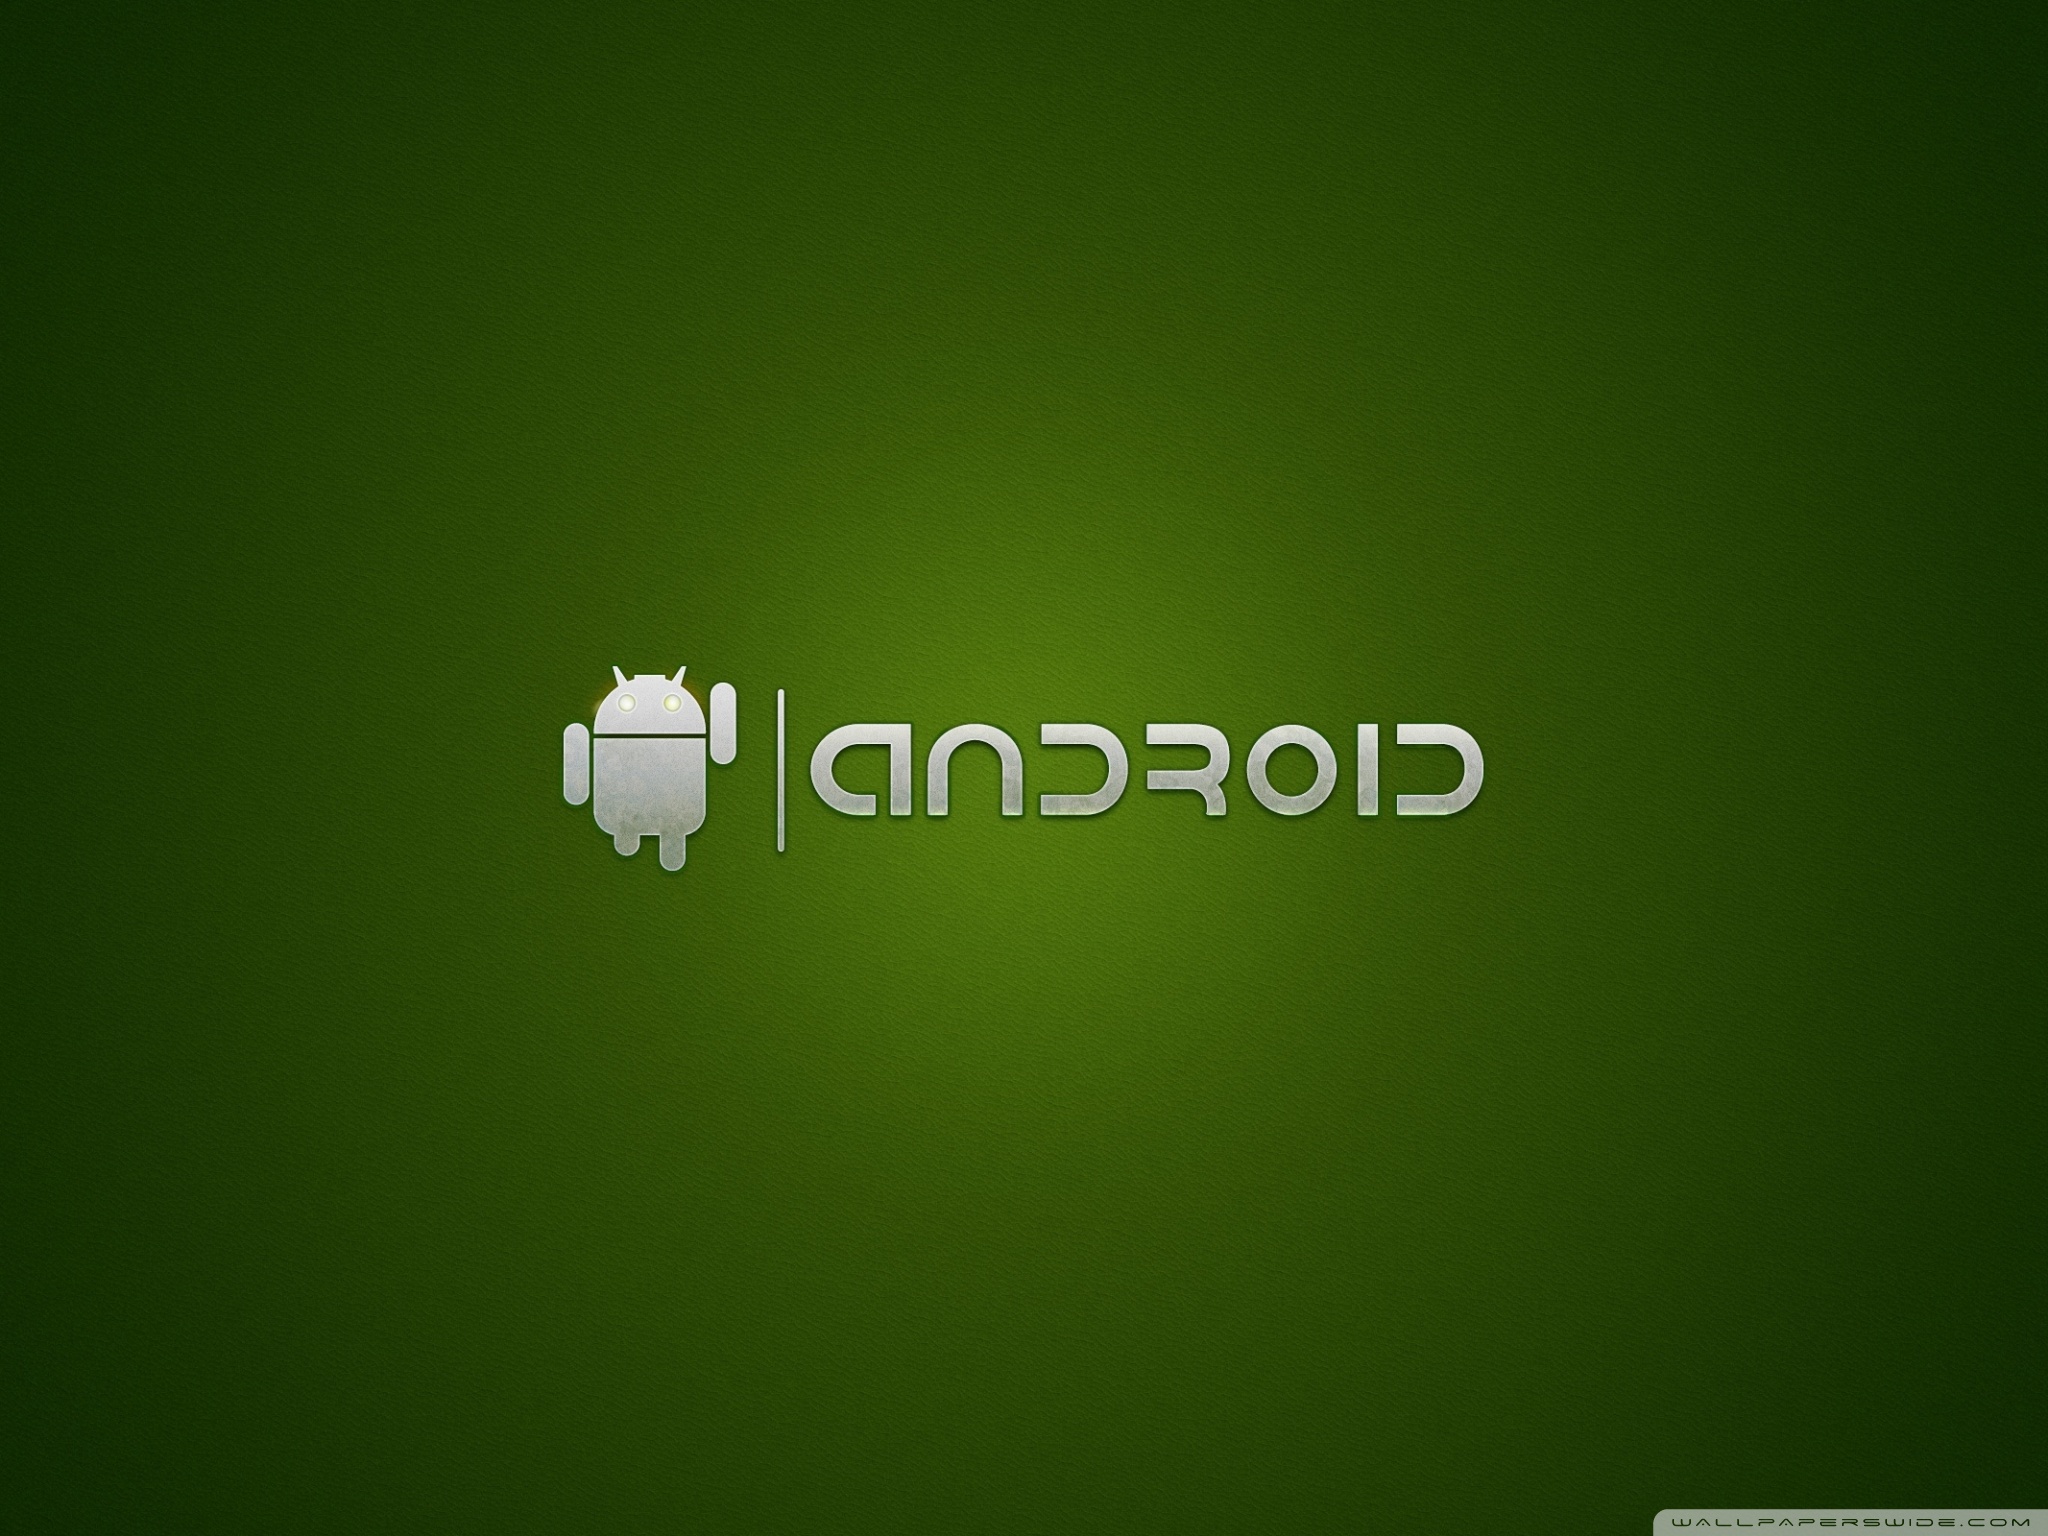 Android and wide HD wallpapers | Pxfuel